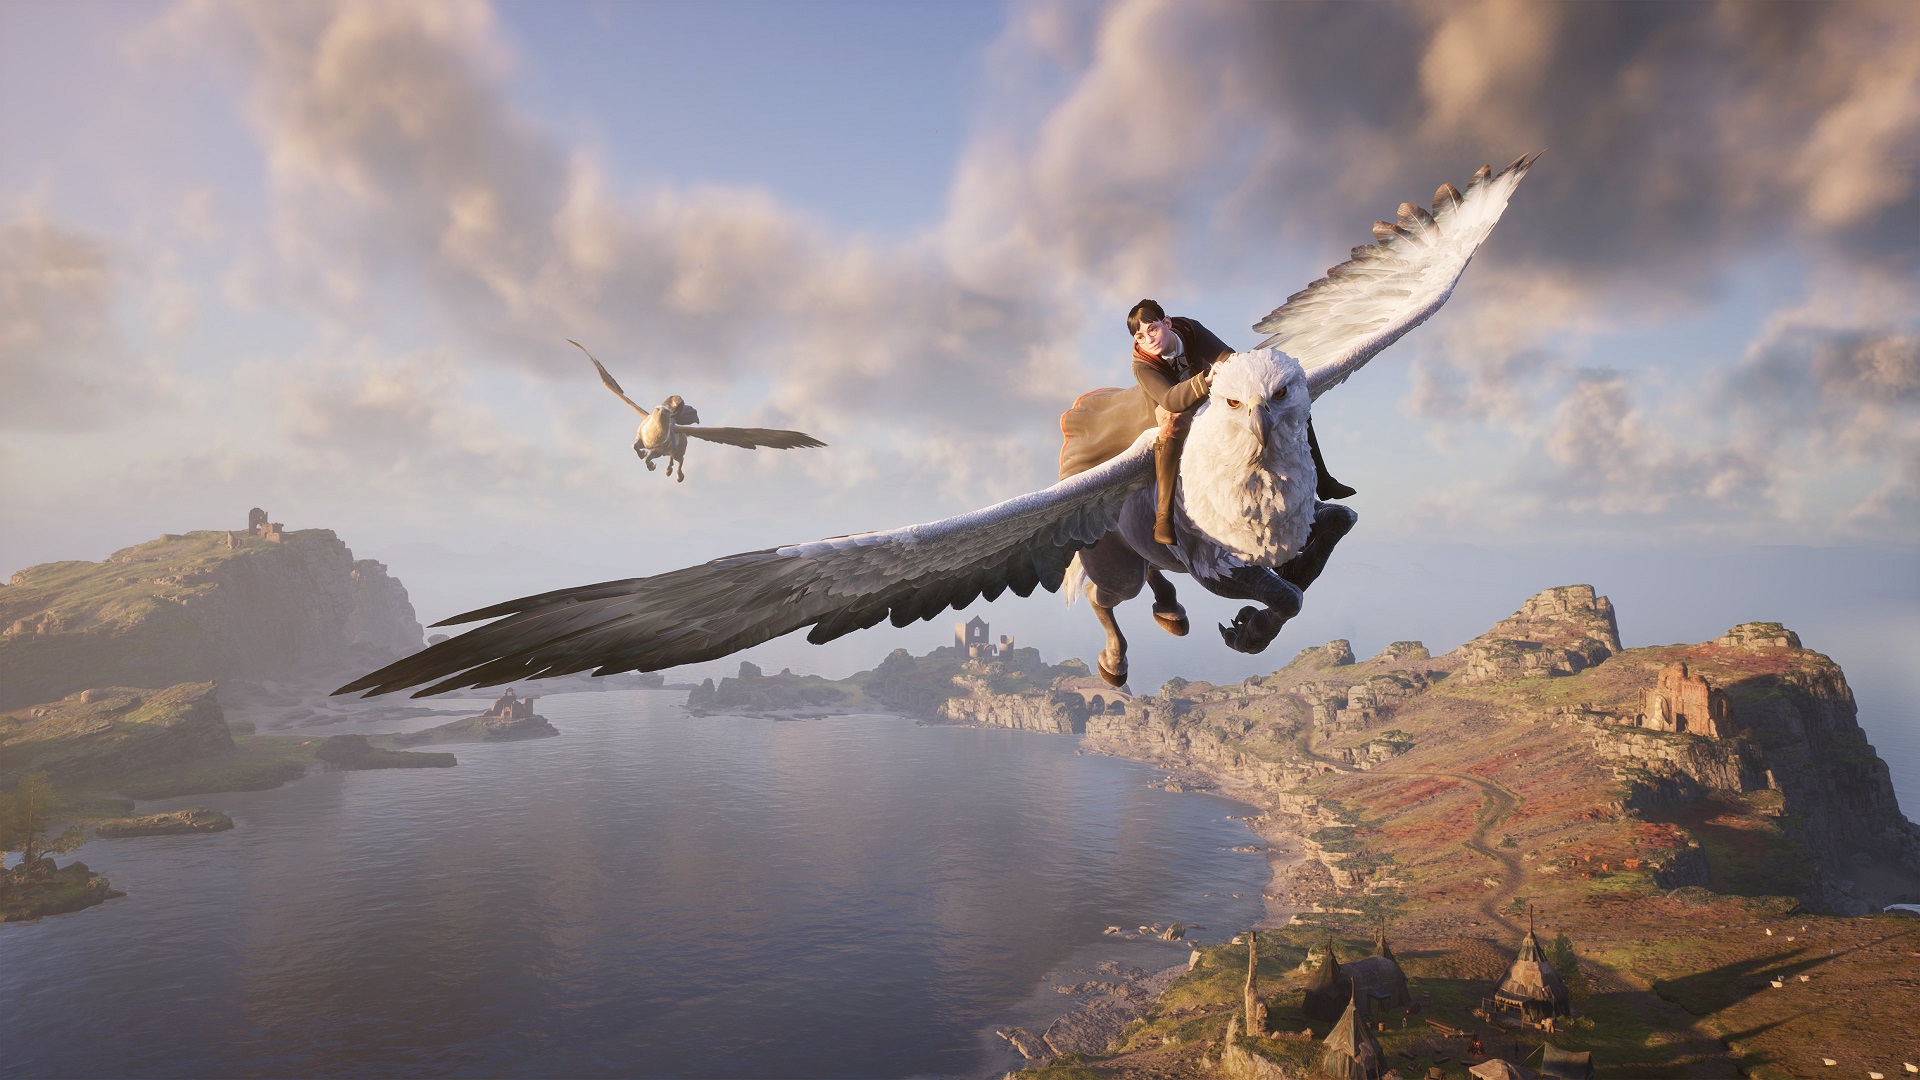 Ark 2 Reportedly A Timed Xbox Exclusive and Will Come To